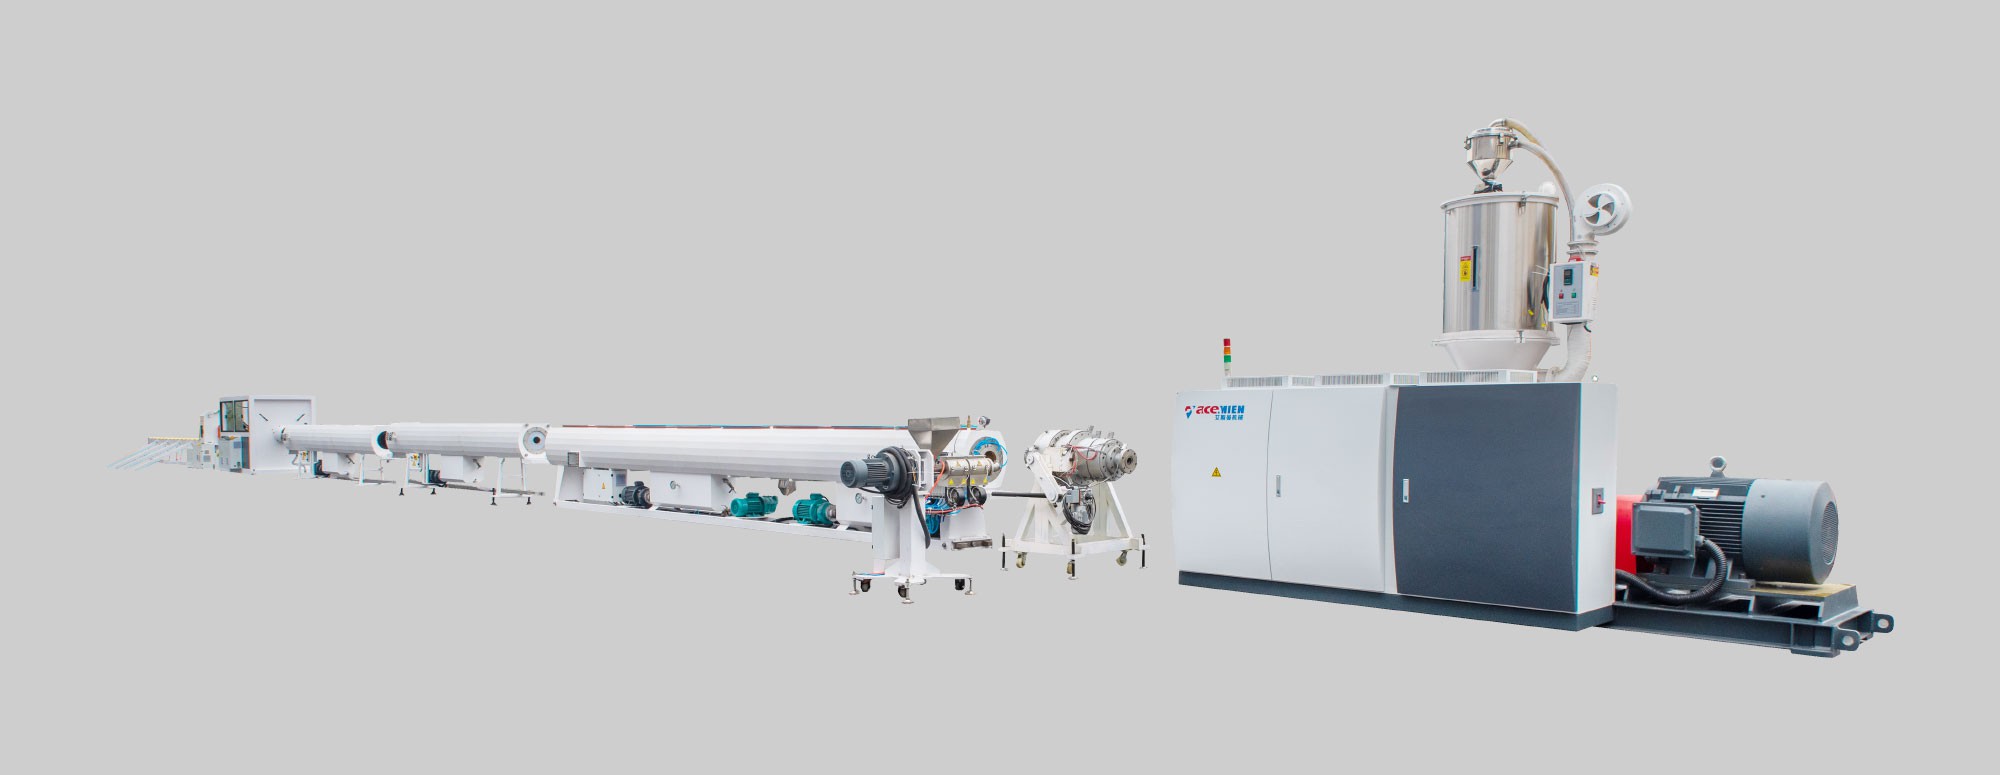 HDPE/PPR/PE-RT/PP Pipe Production Line